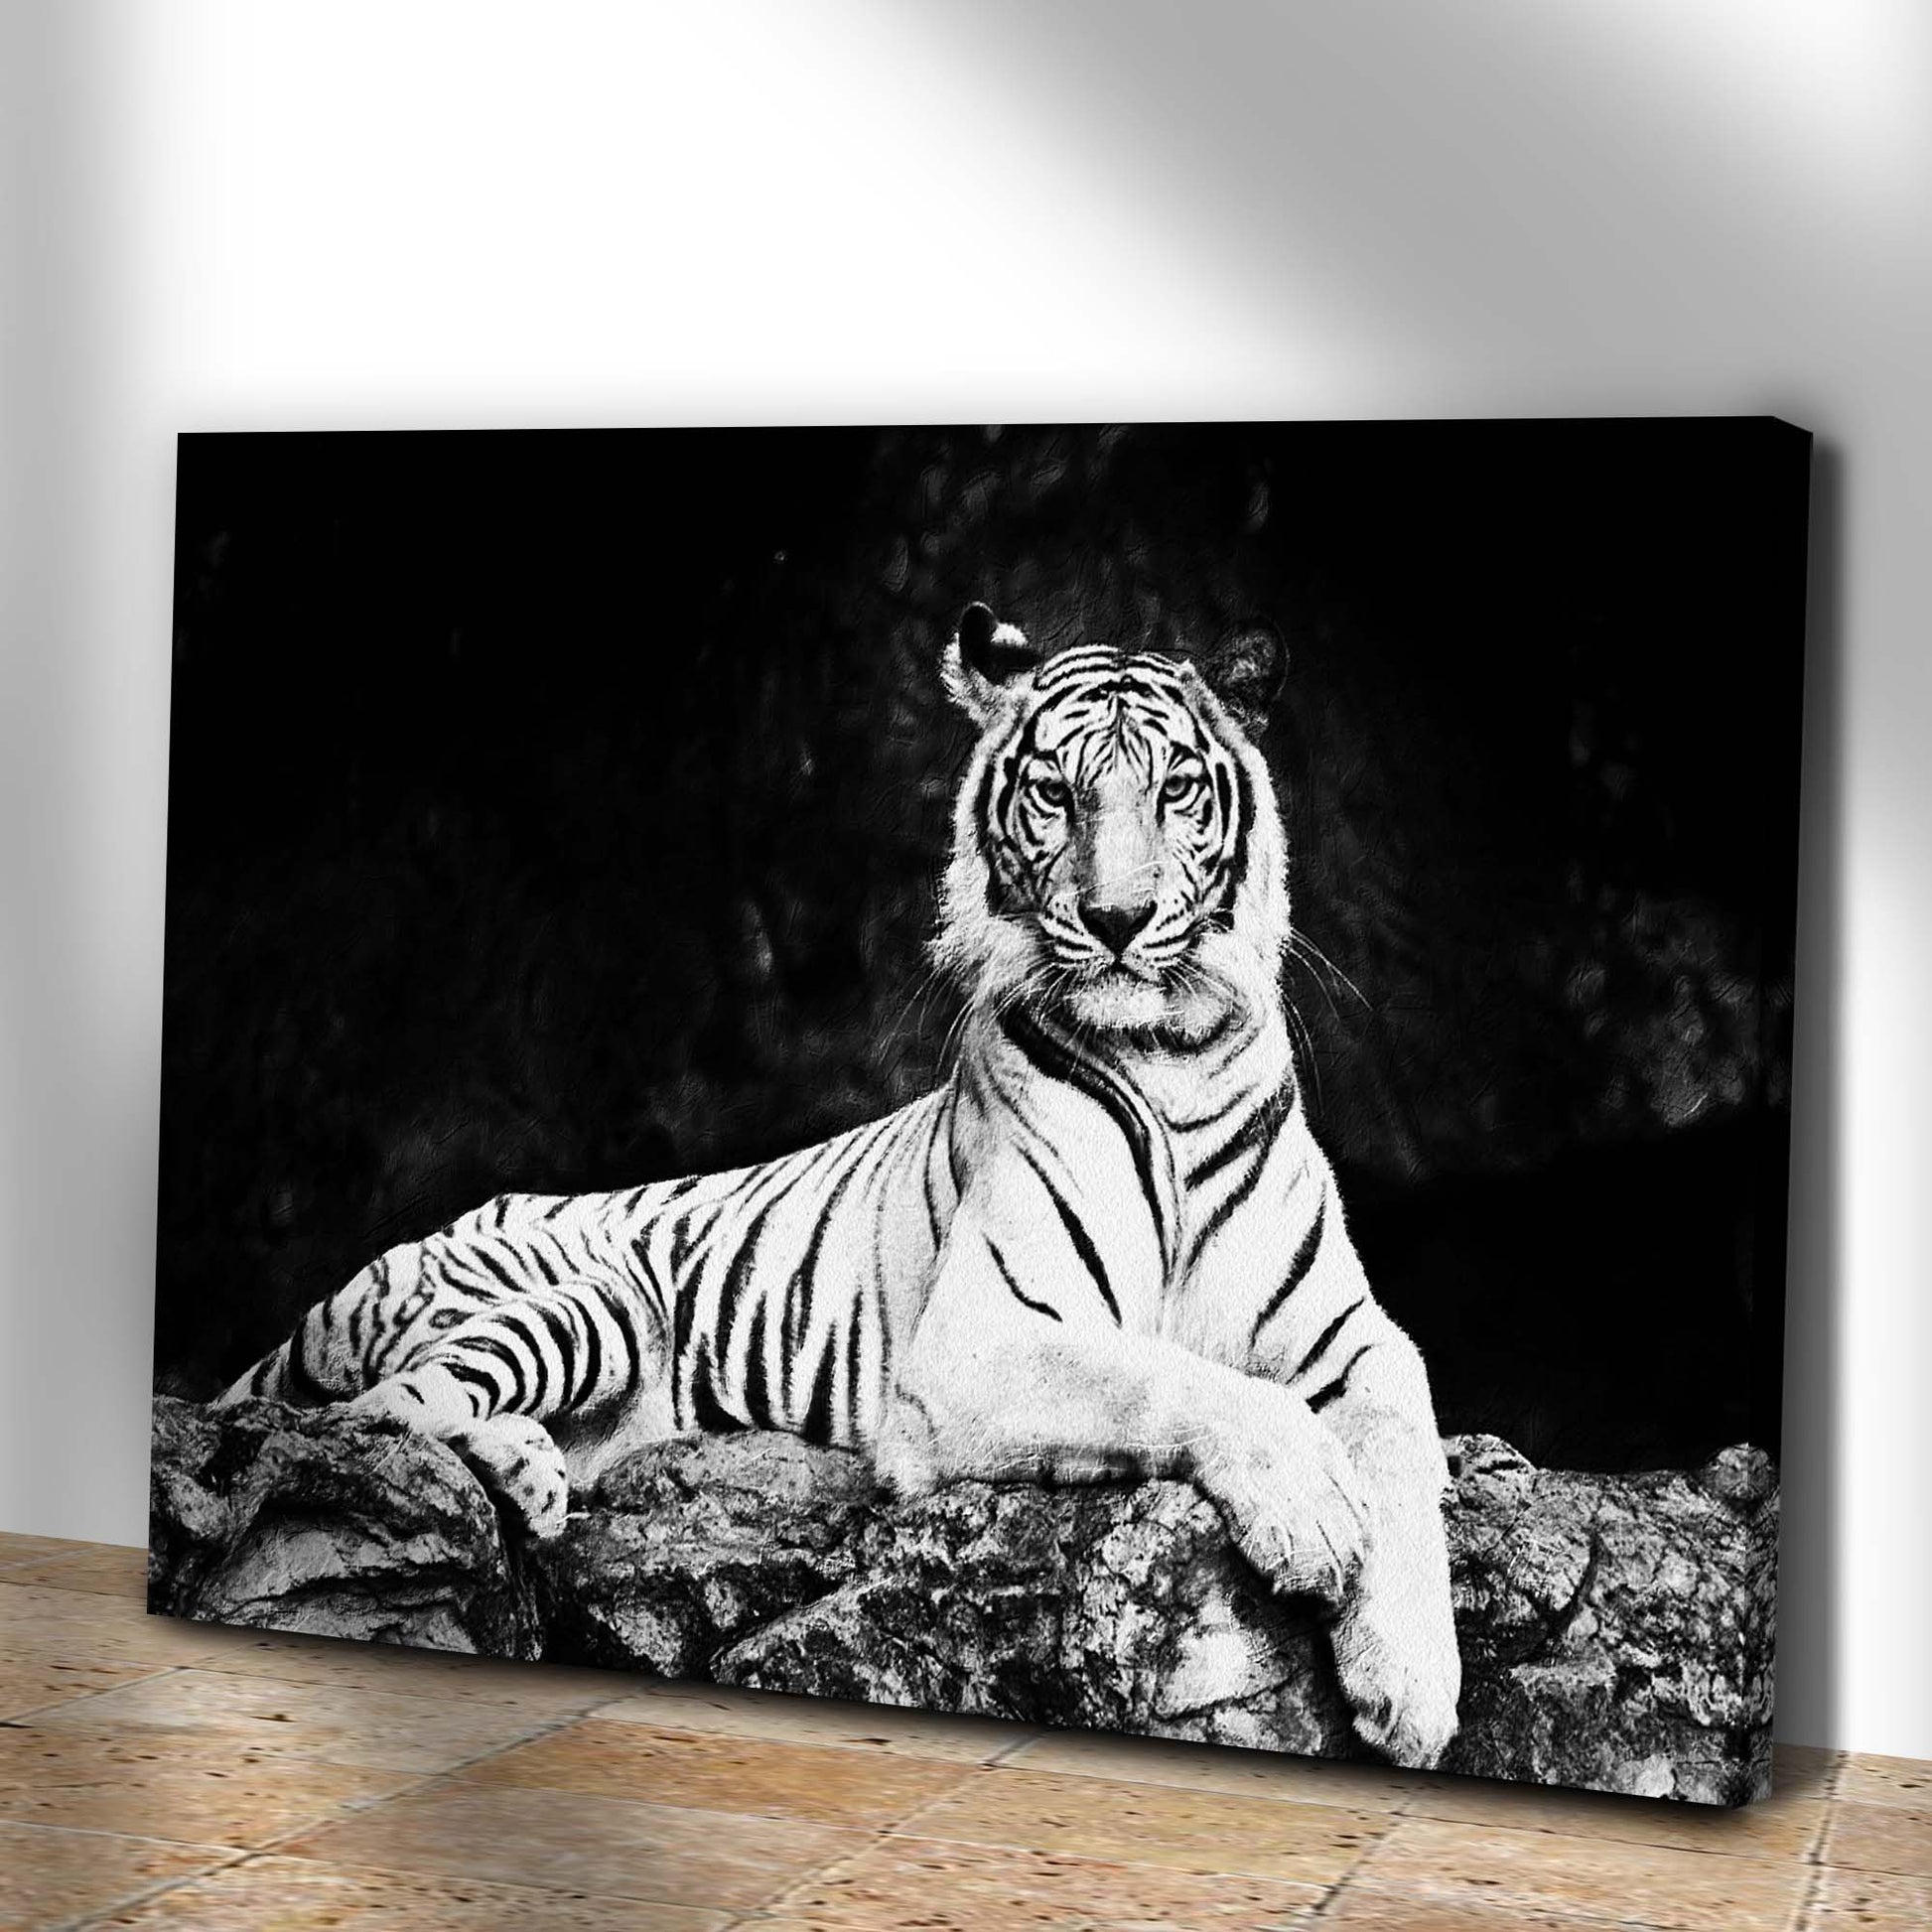 Monochrome Sitting Tiger Canvas Wall Art Style 2 - Image by Tailored Canvases